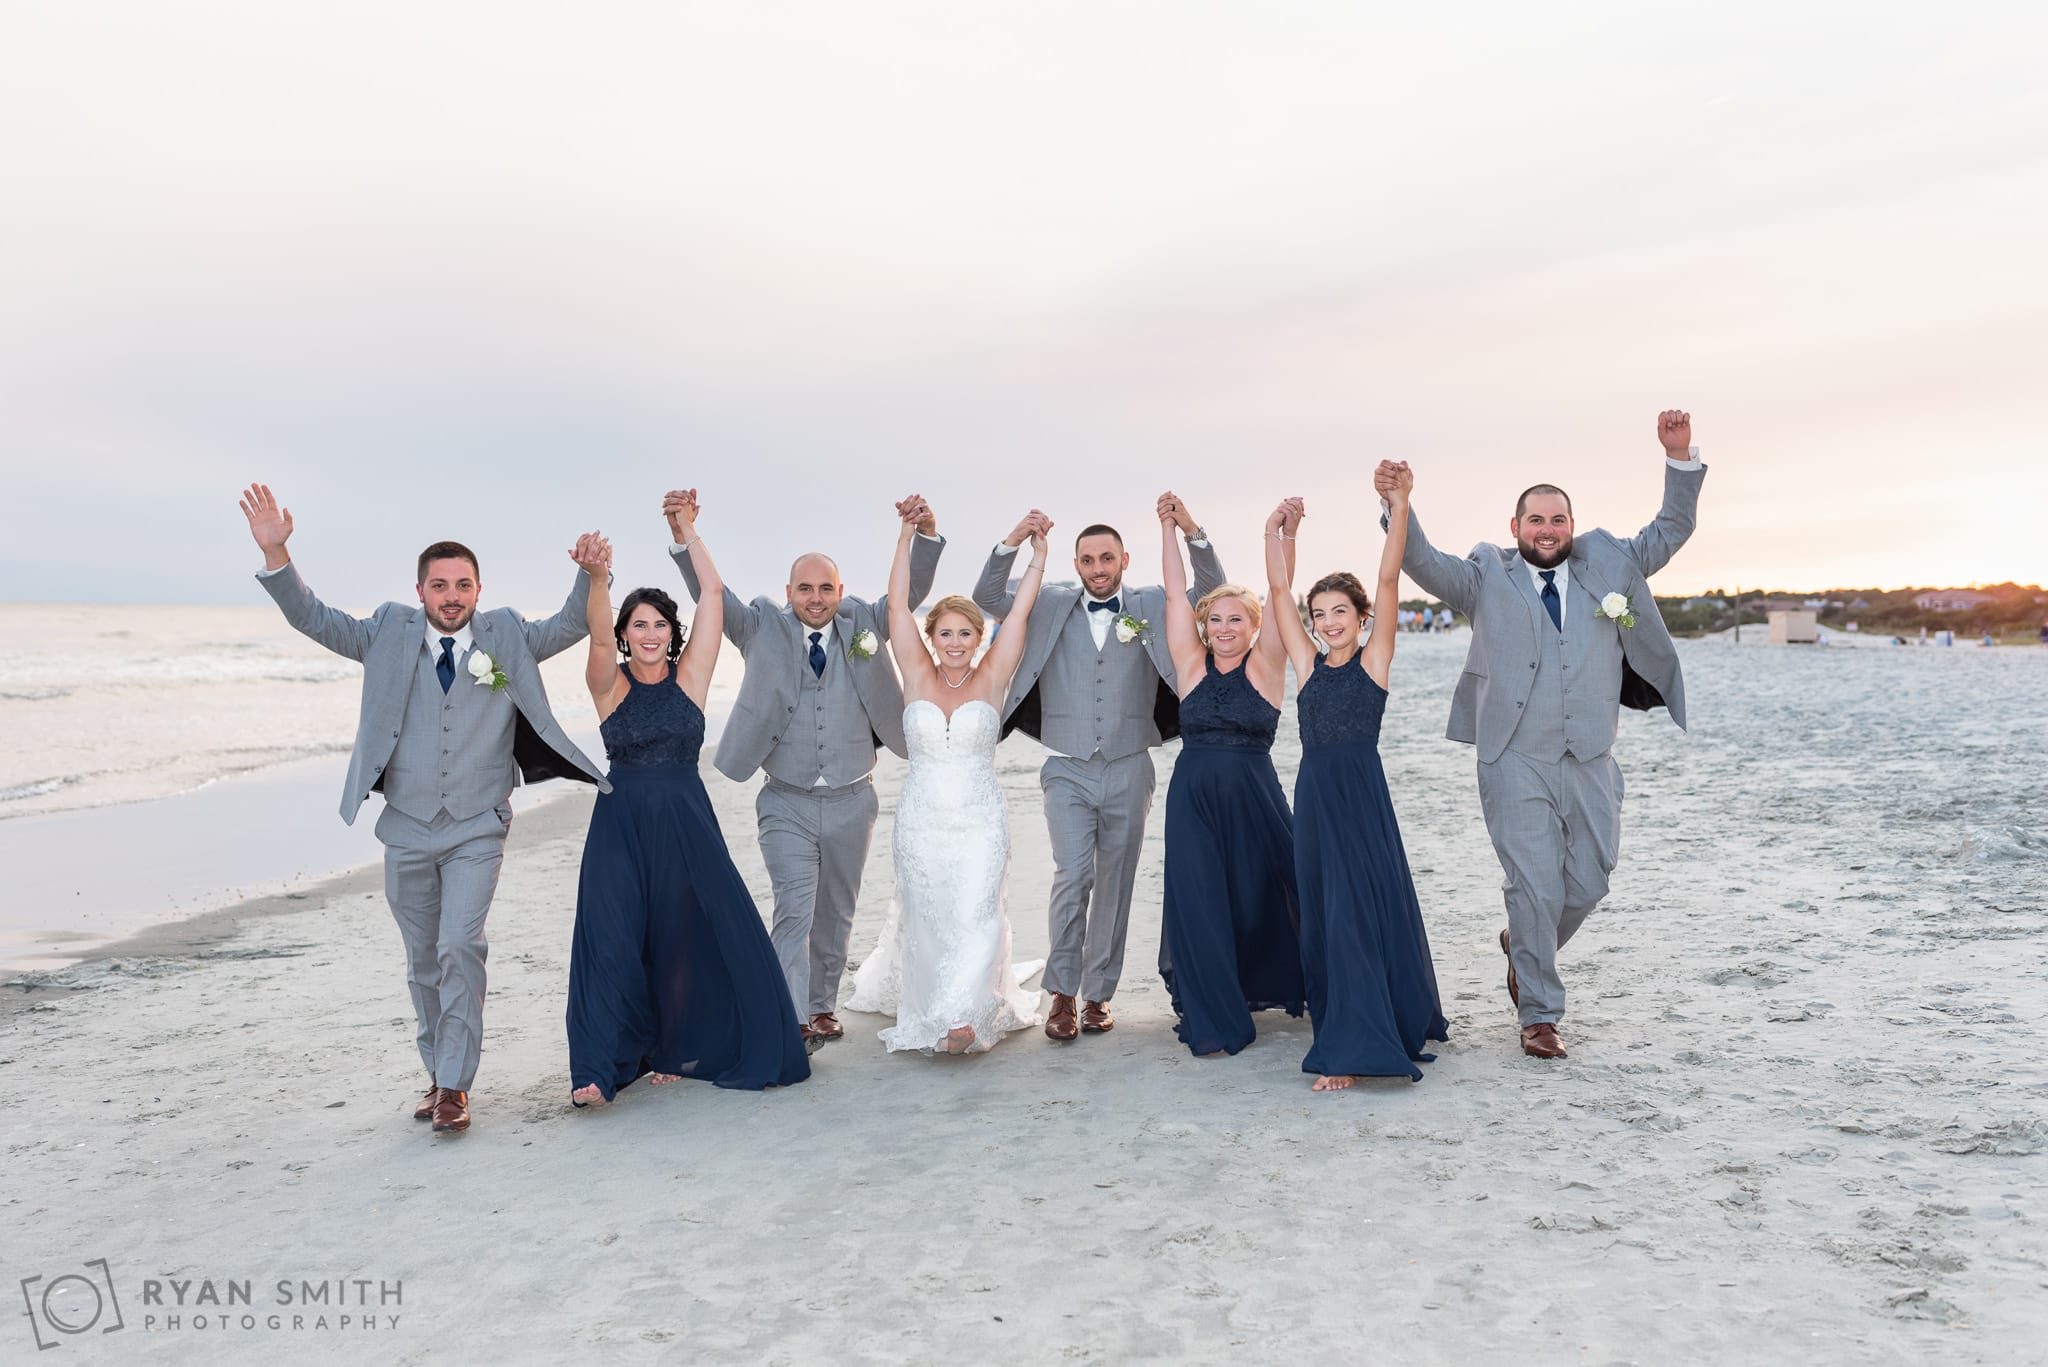 Bridal party walking down the beach with hands in the air - 21 Main Events - North Myrtle Beach